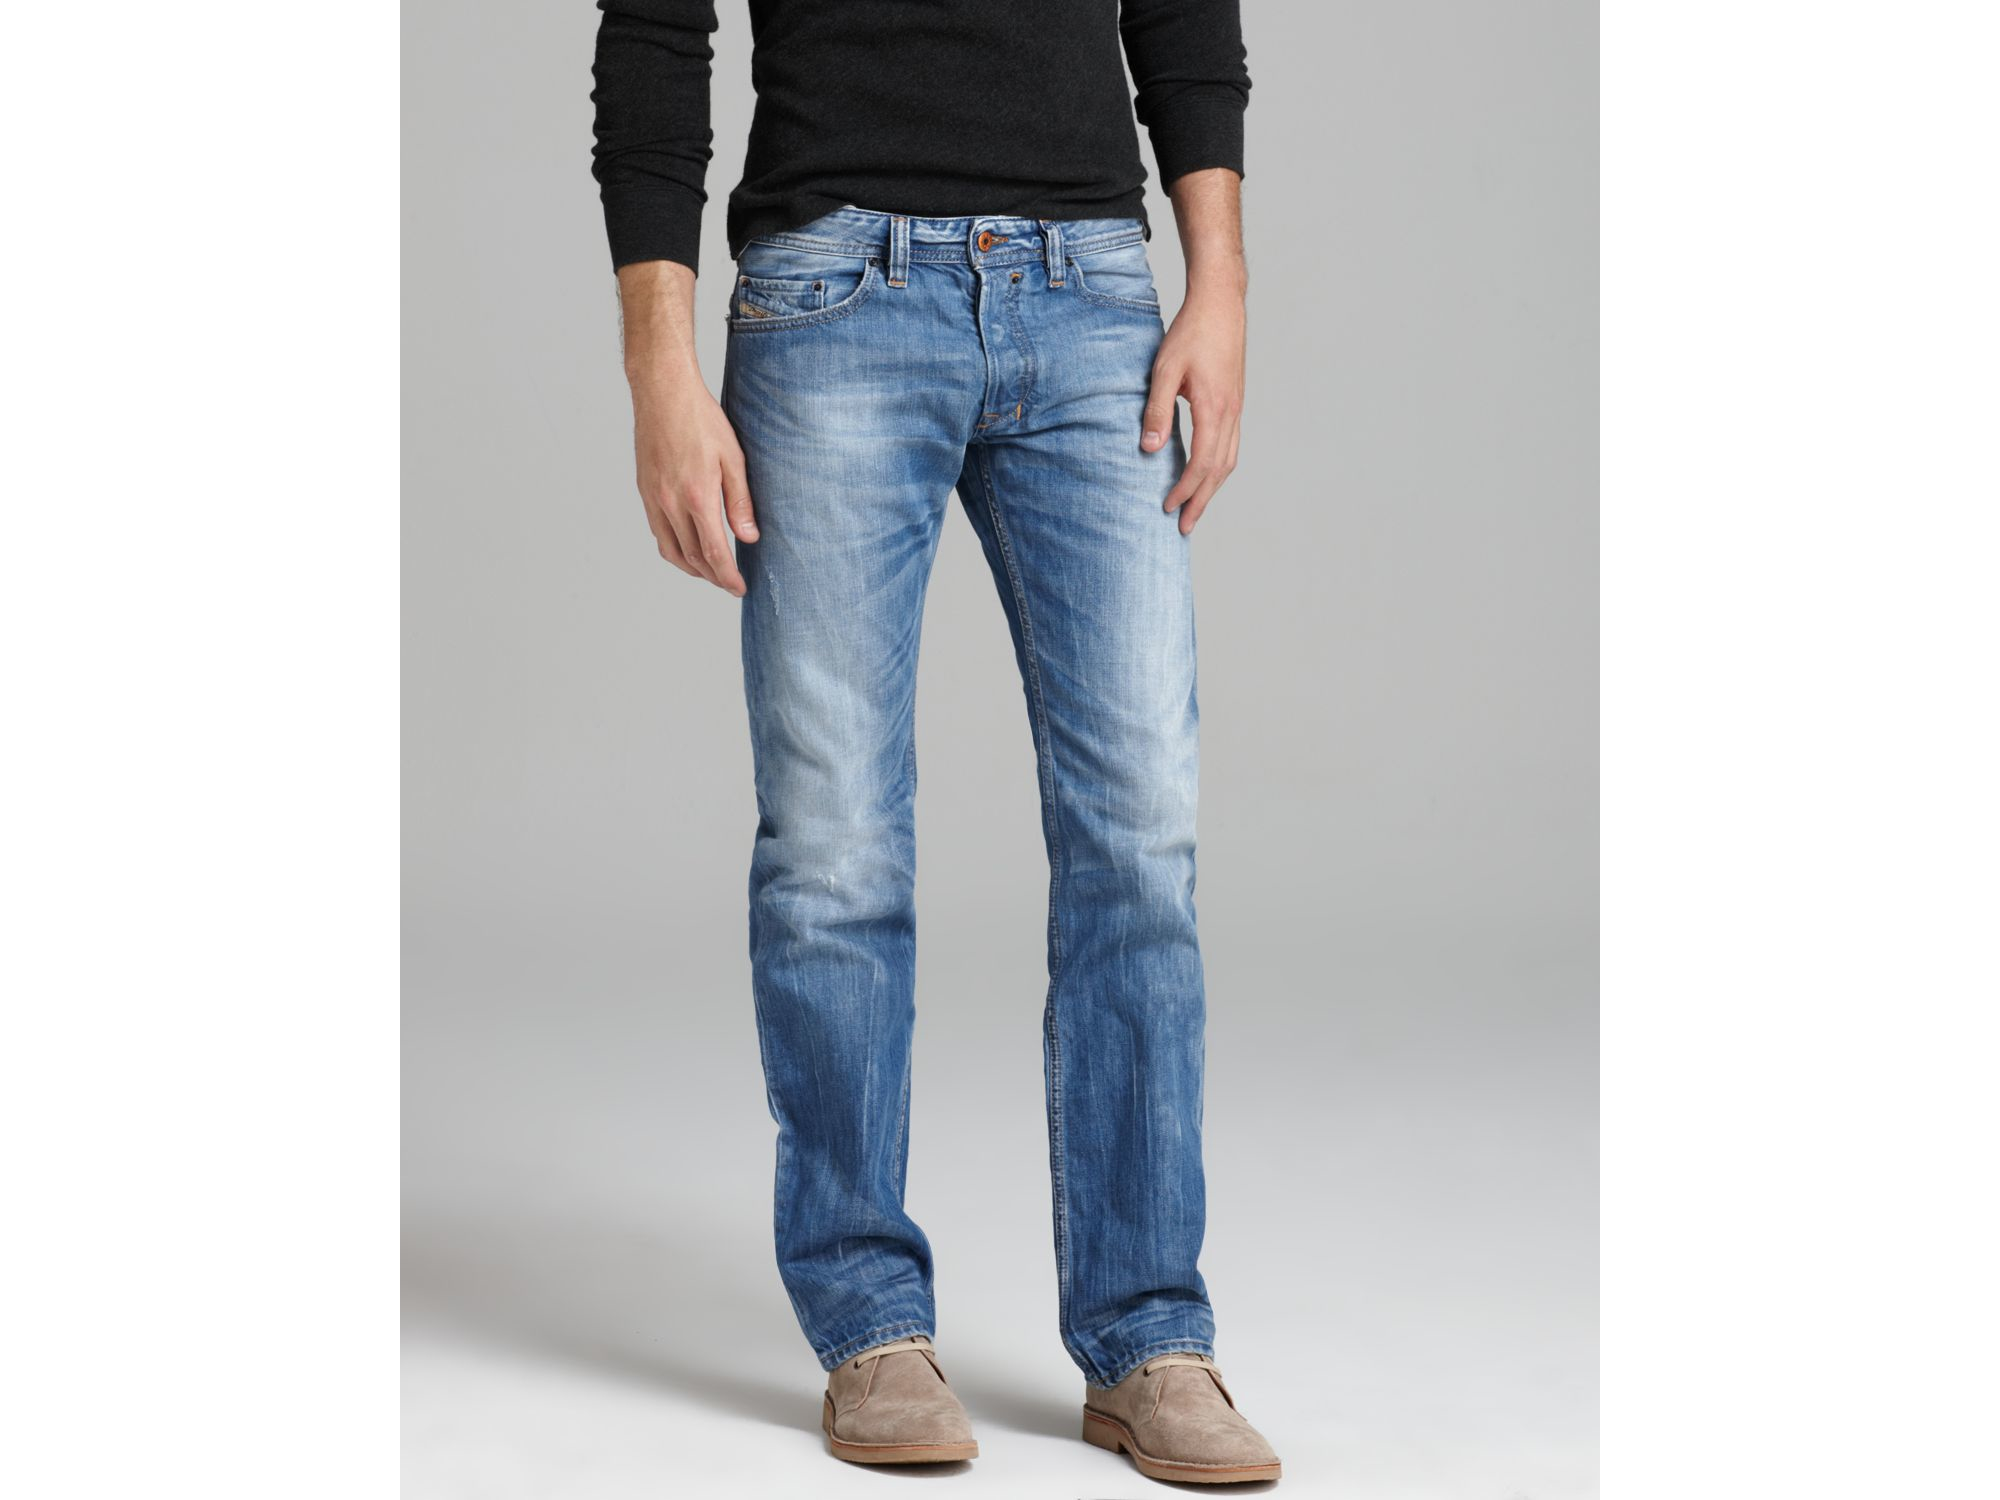 Expression continue To deal with DIESEL Jeans - Safado Straight Fit In Sky in Blue for Men | Lyst